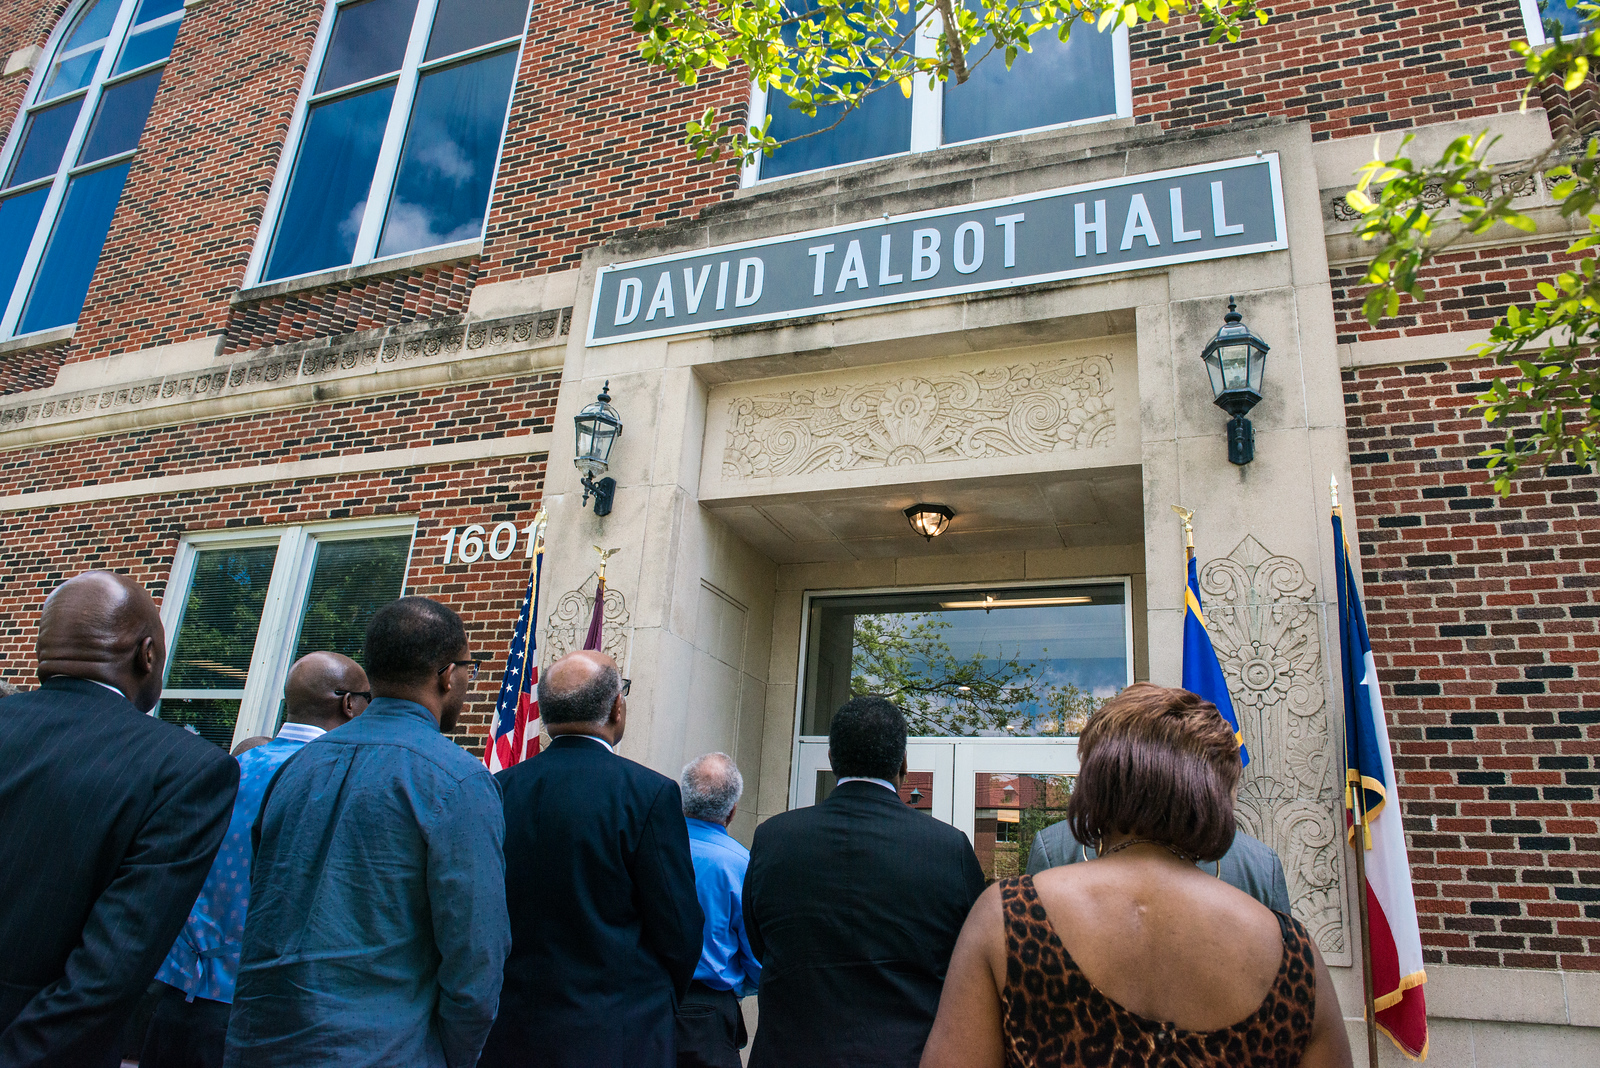 A small crowd of people looking up at a brick building with the sign "David Talbot Hall" hung above the door